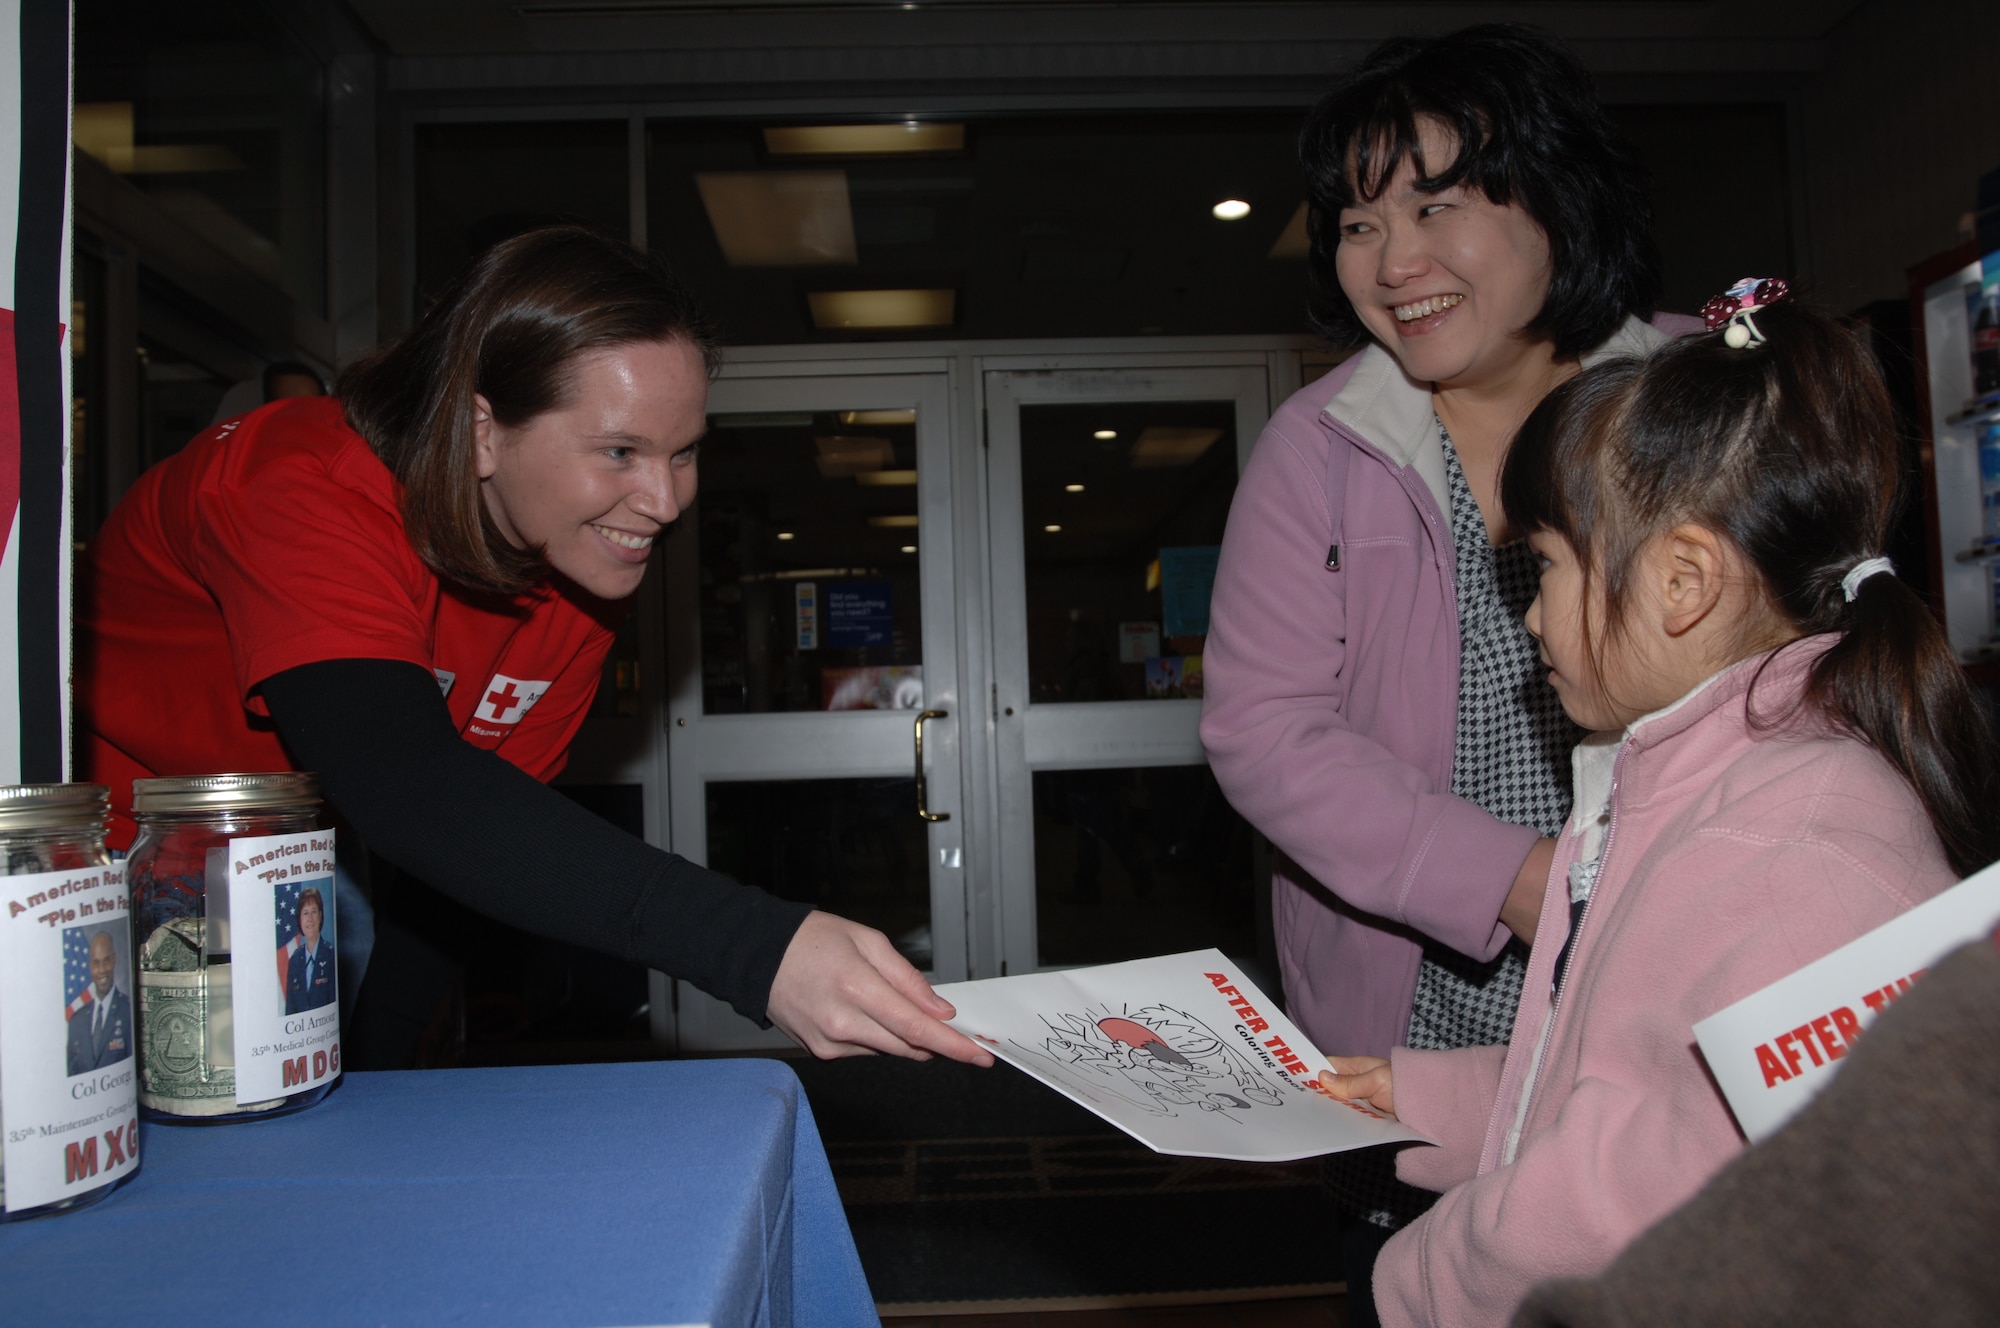 MISAWA AIR BASE, Japan -- Mio Watamabe, 4 years old, accepts a Red Cross coloring book from Maggie Kuntz, Red Cross chairman of volunteers, while her mother Hiroko Watamabe watches at the Red Cross information booth near the commissary March 20, 2008.  The Red Cross is holding several classes on first aid, babysitter training, and volunteer orientation this month.  (U.S. Air Force photo by Senior Airman Robert Barnett)